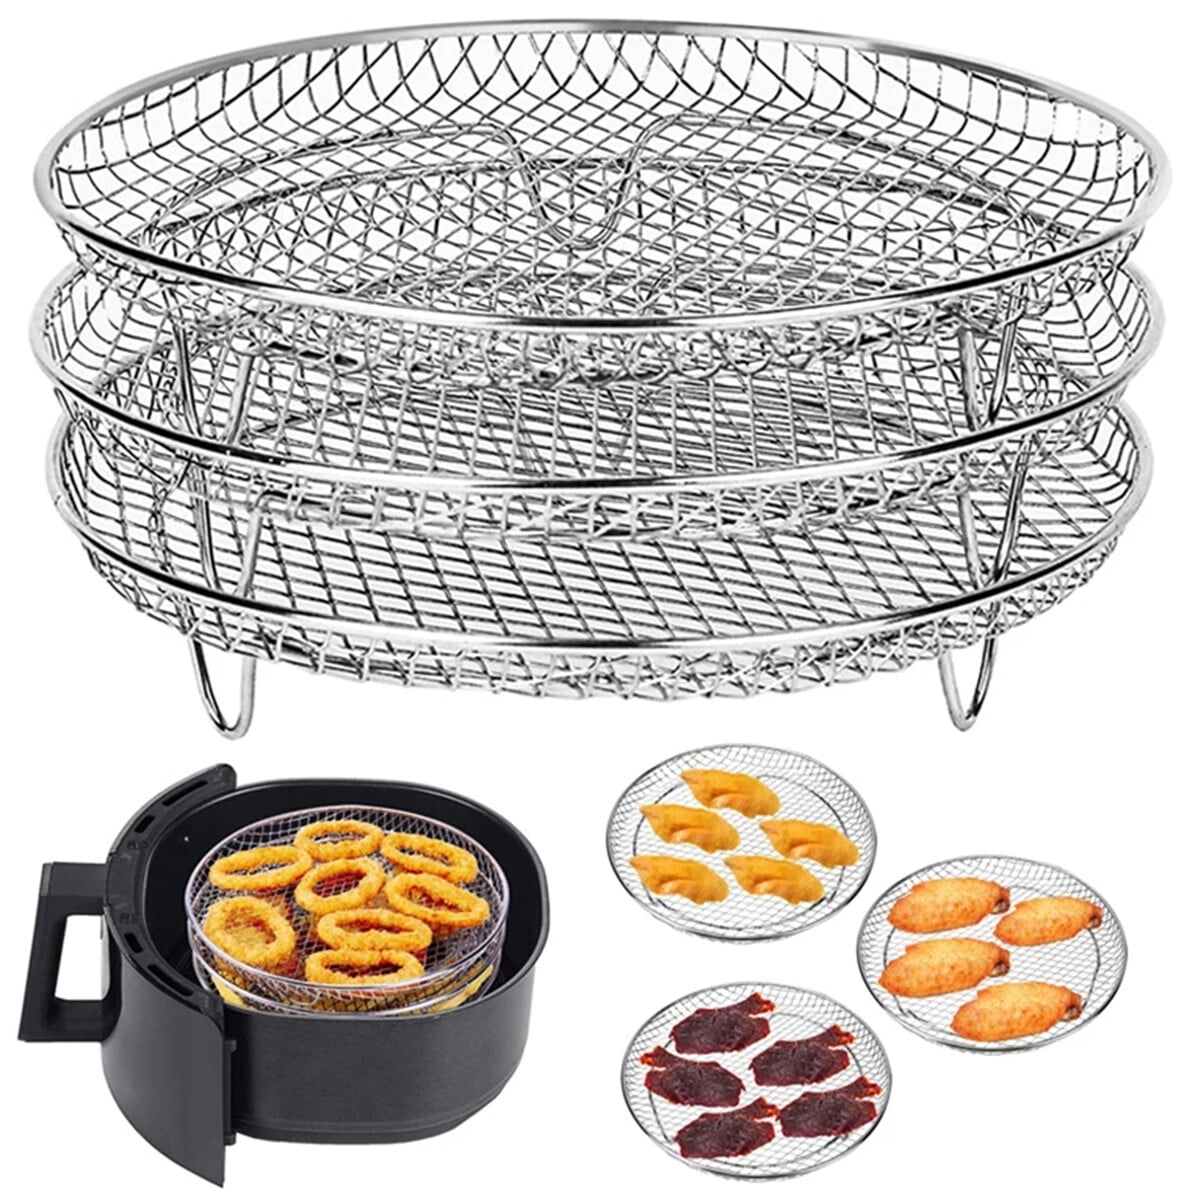 Using the Air Fry Feature and Accessory Basket 